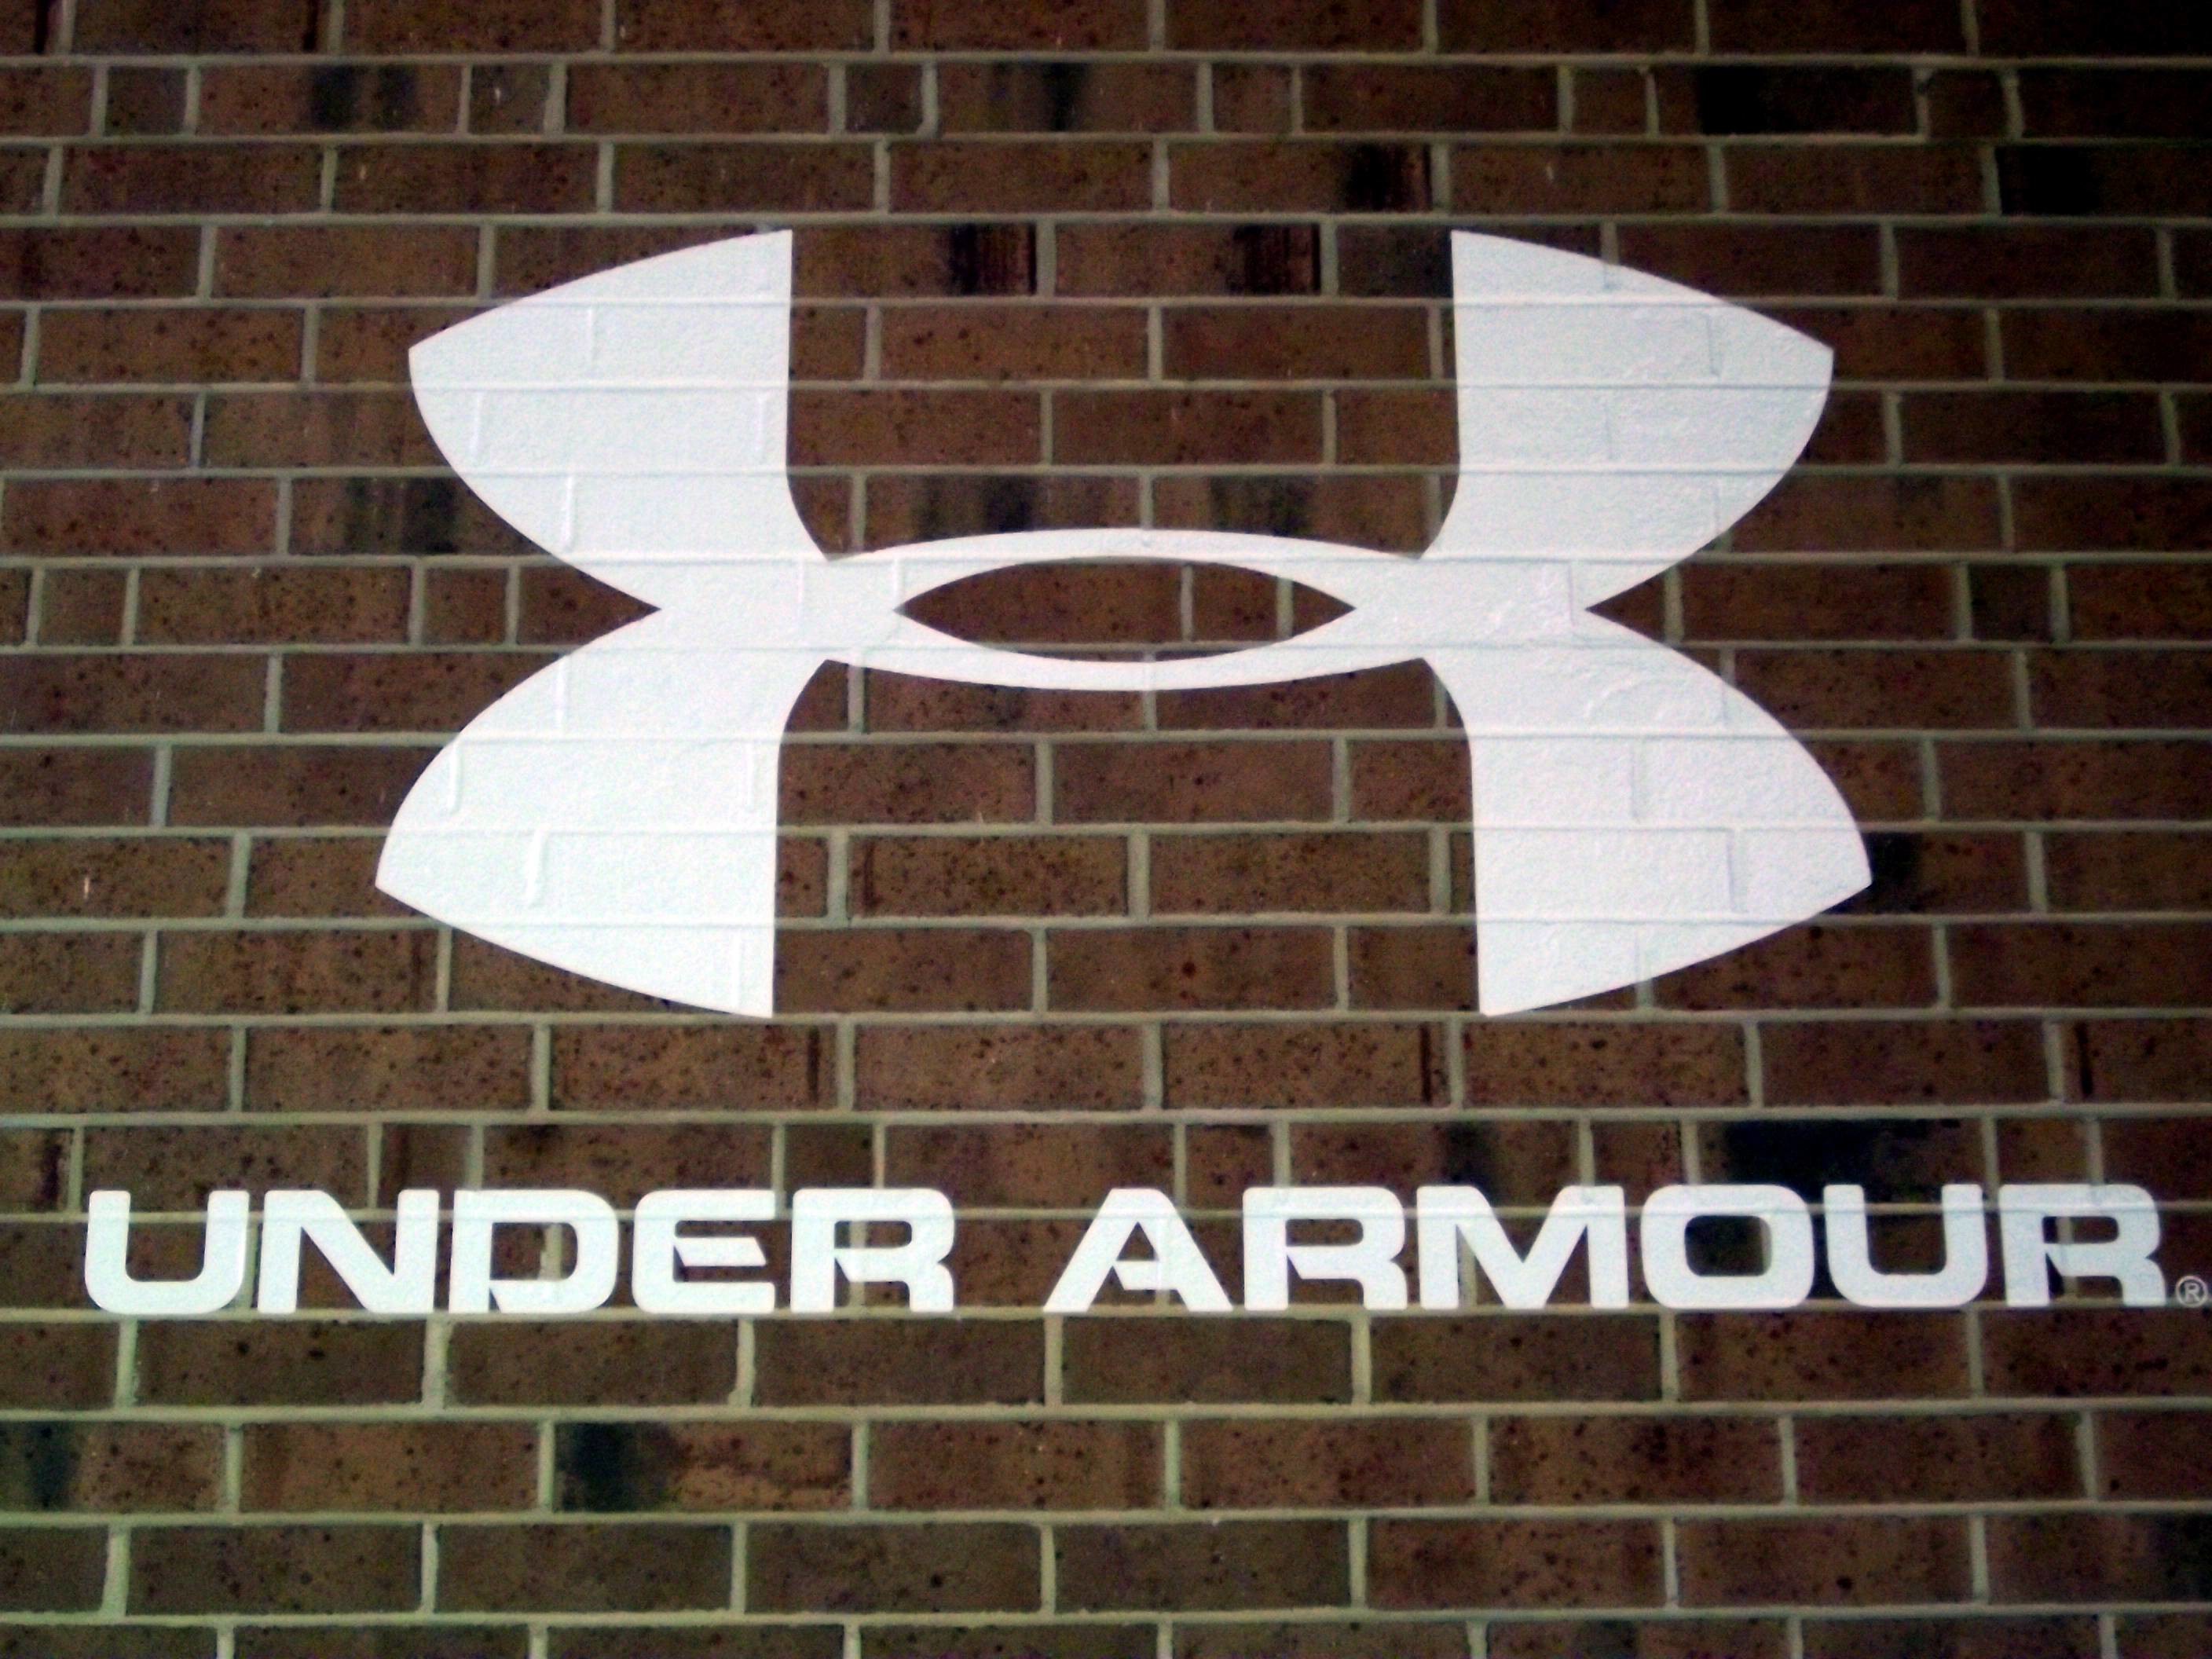 2816x2112 Images Under Armour Wallpapers HD.